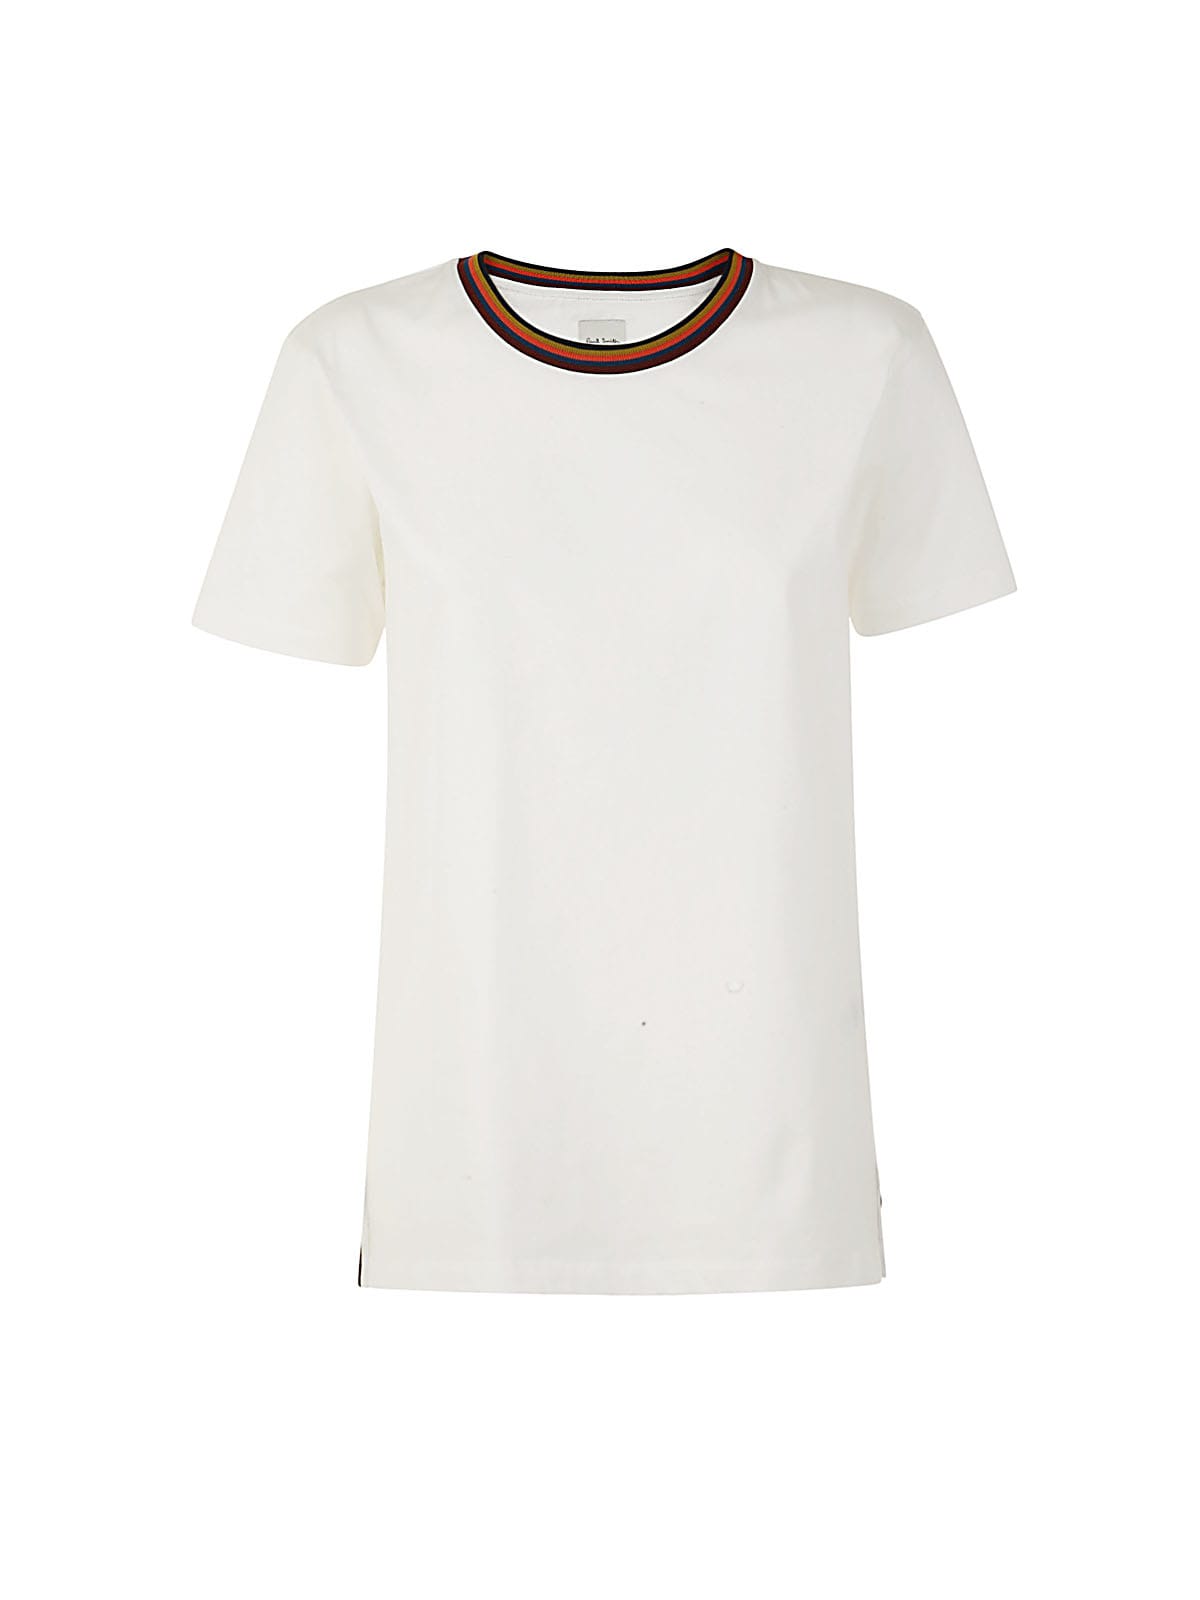 Paul Smith Crew Neck T-shirt With Striped Neck